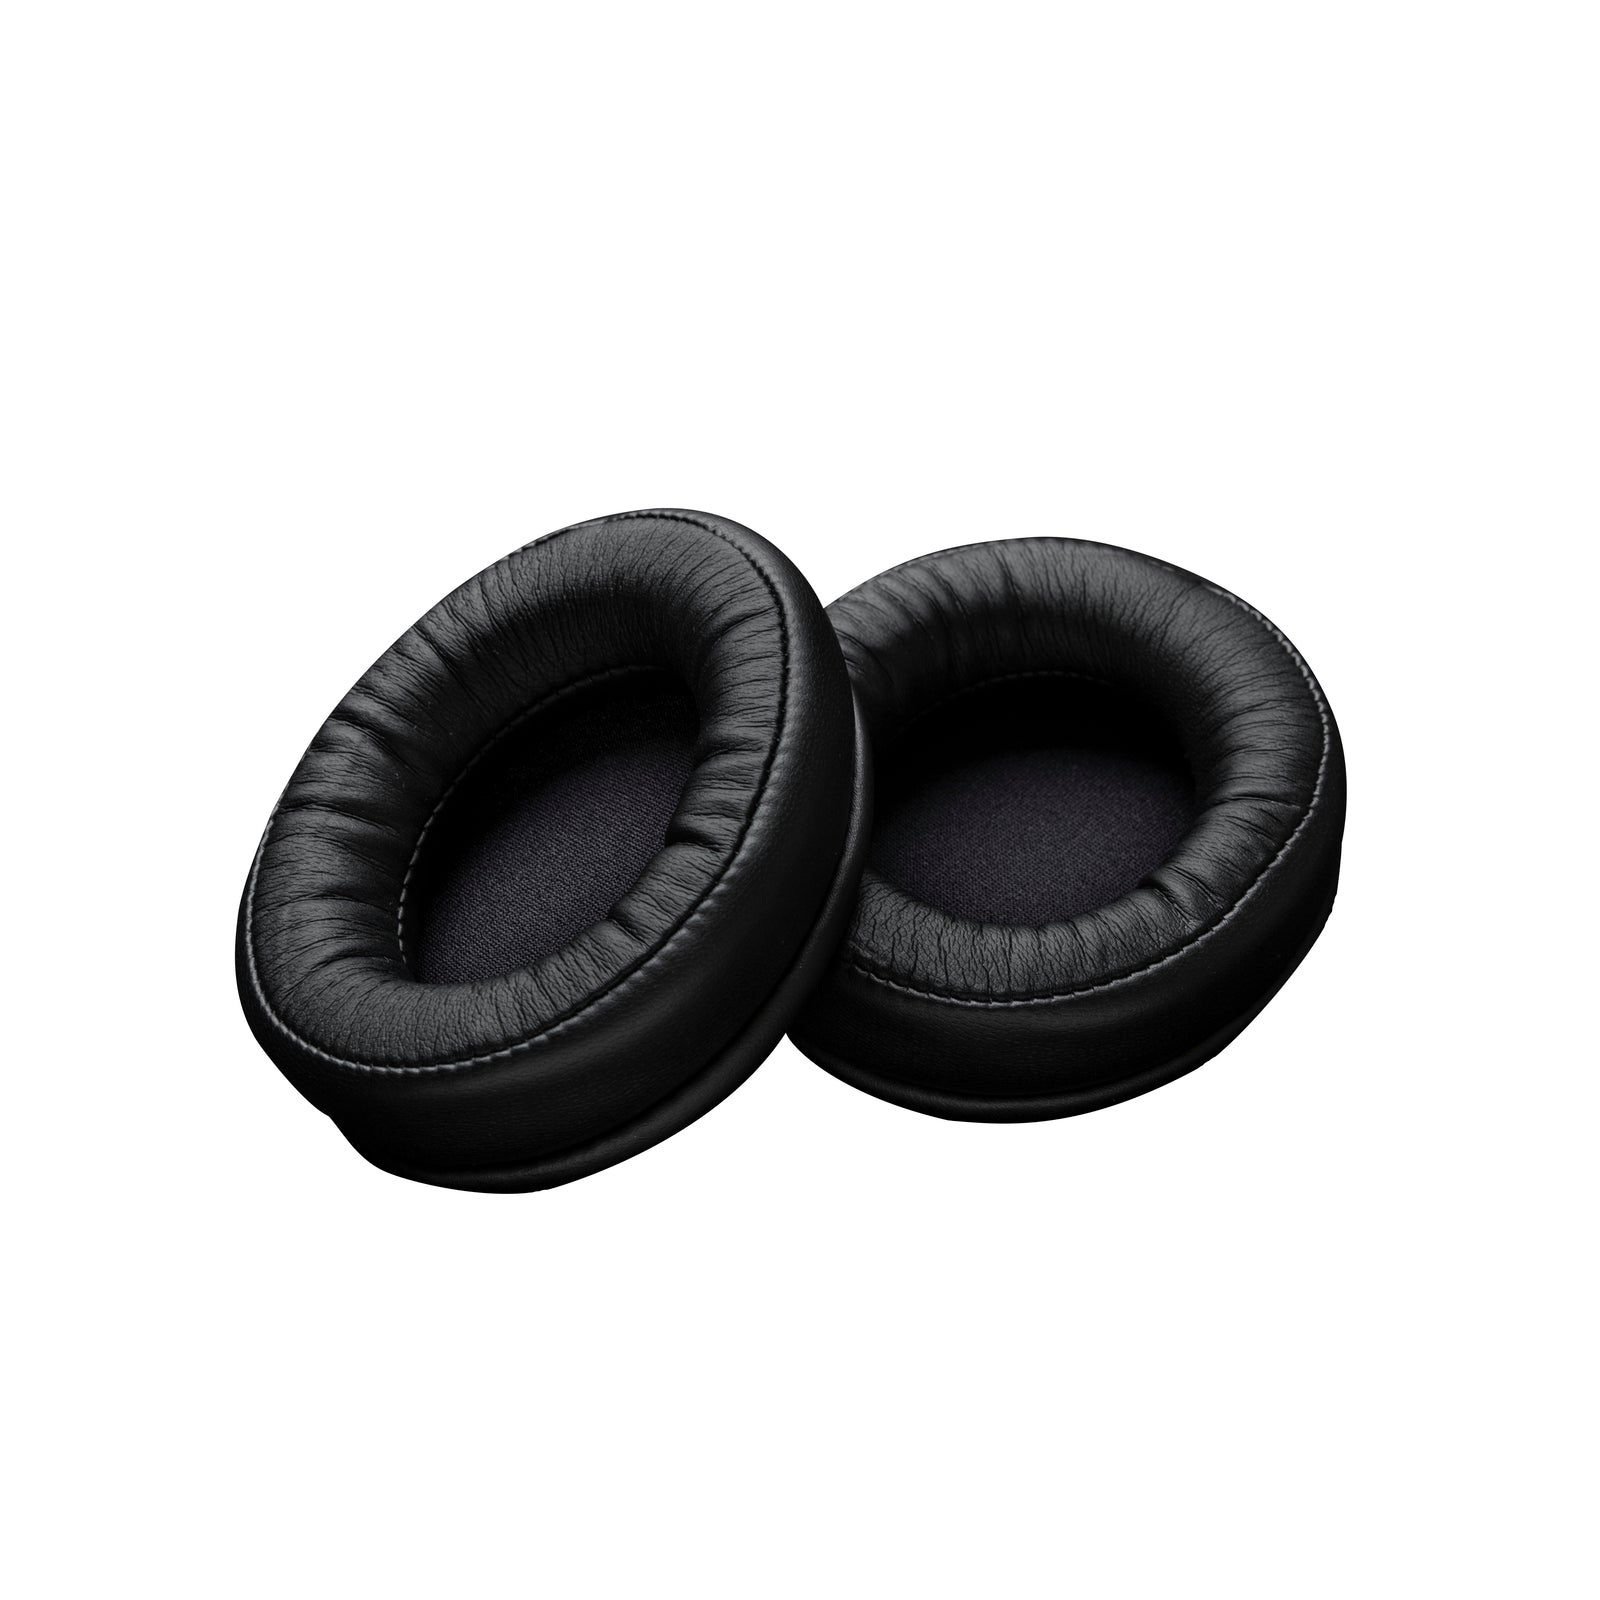 Front view of the spare leatherette ear cushions of the HyperX Cloud MIX Gaming Headset